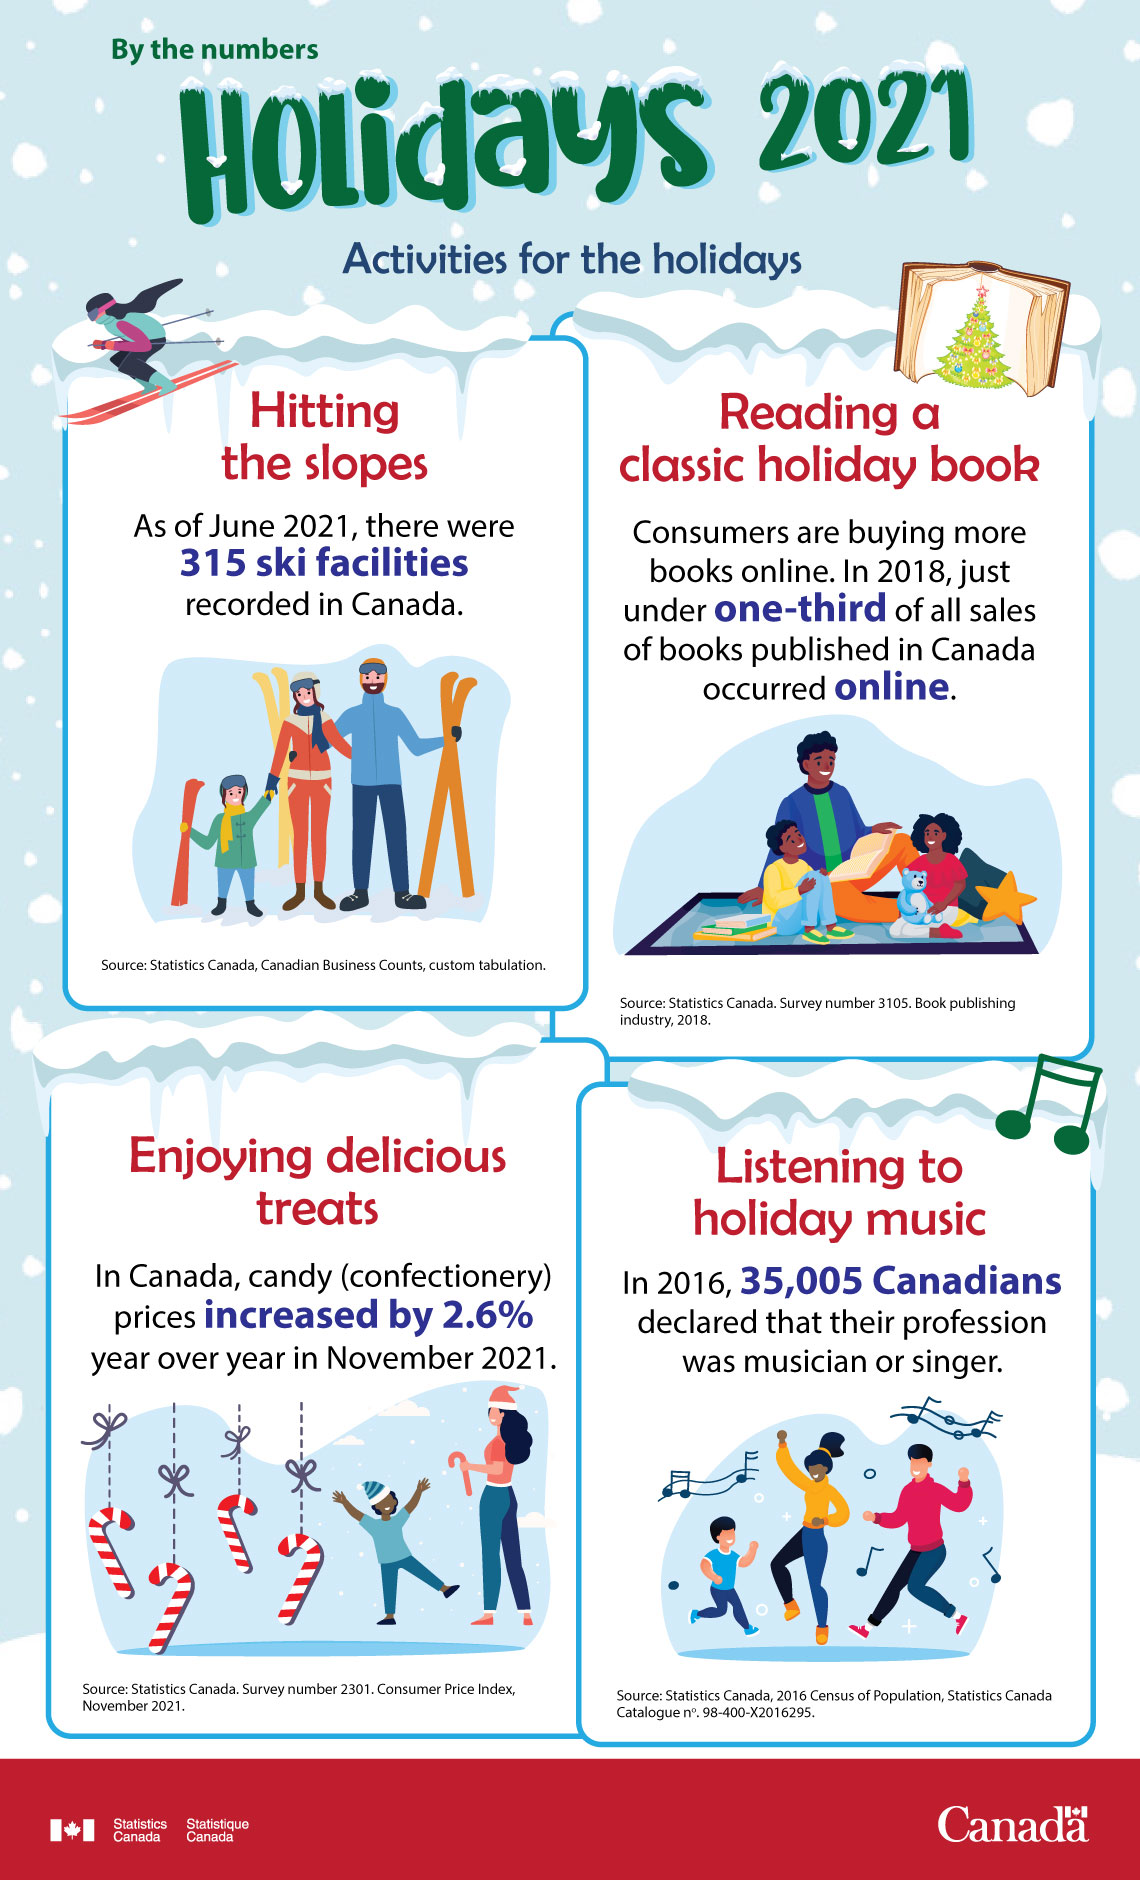 By the numbers - The Holidays